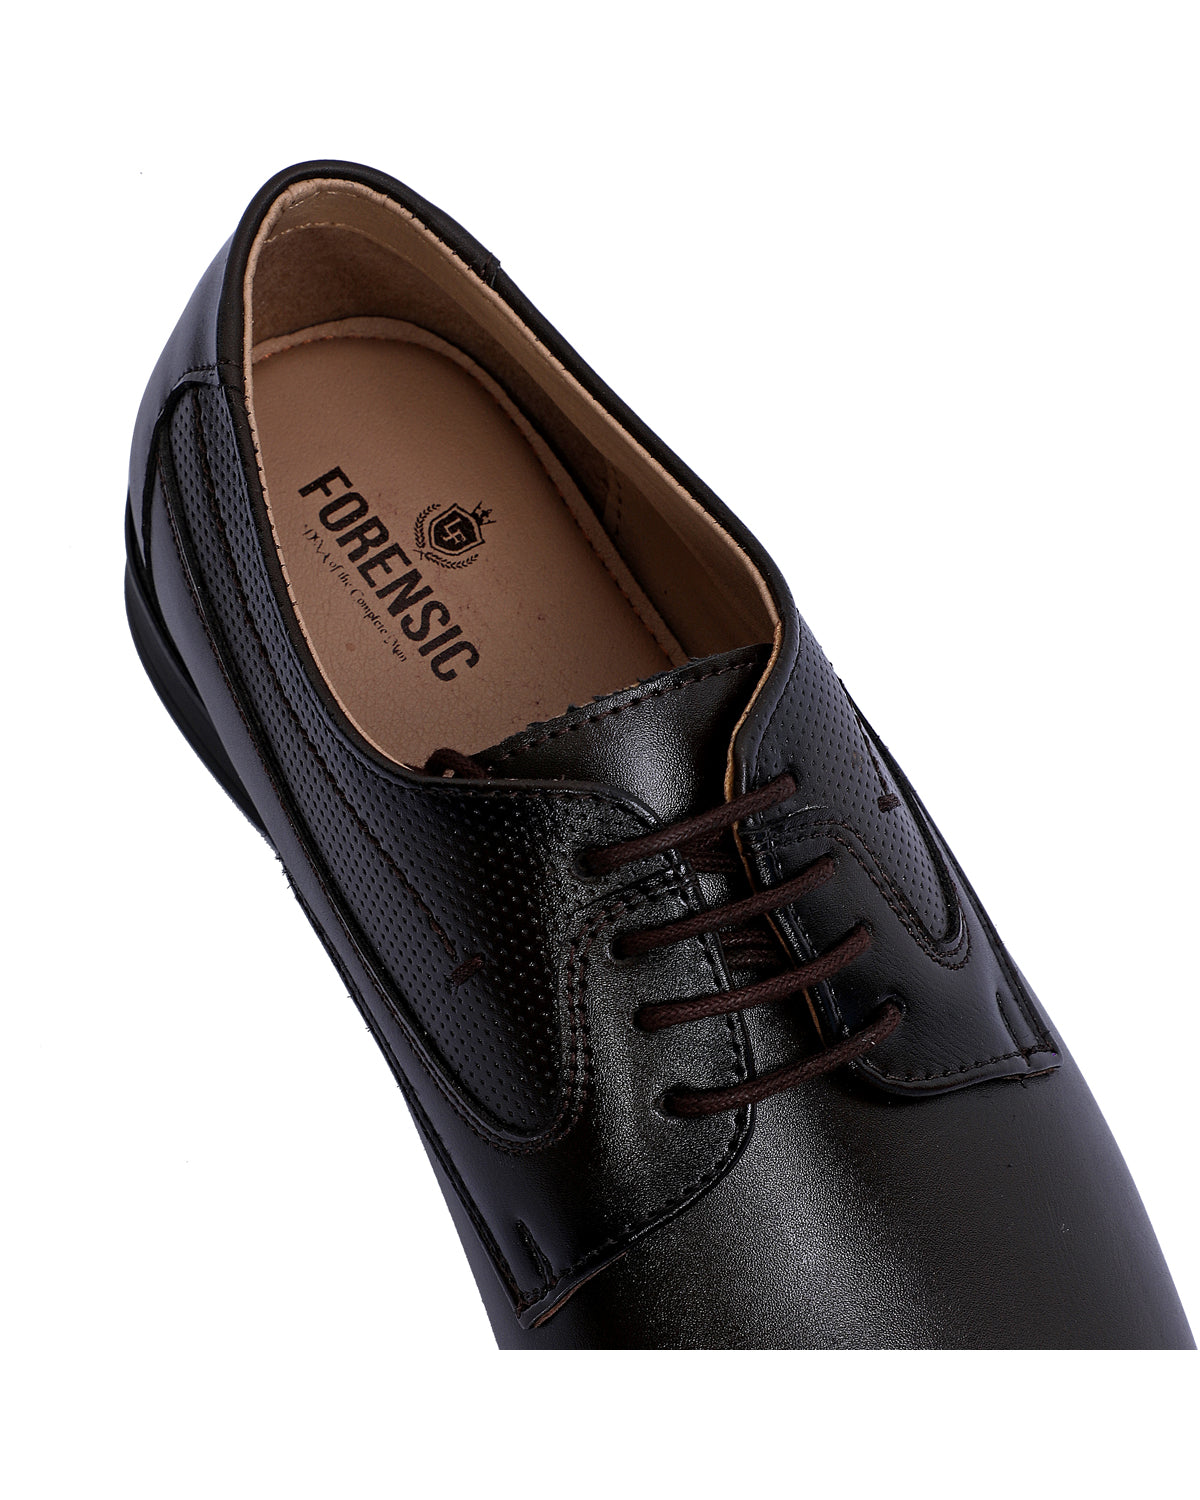 Leather Oxford Shoes Round Toe - Black